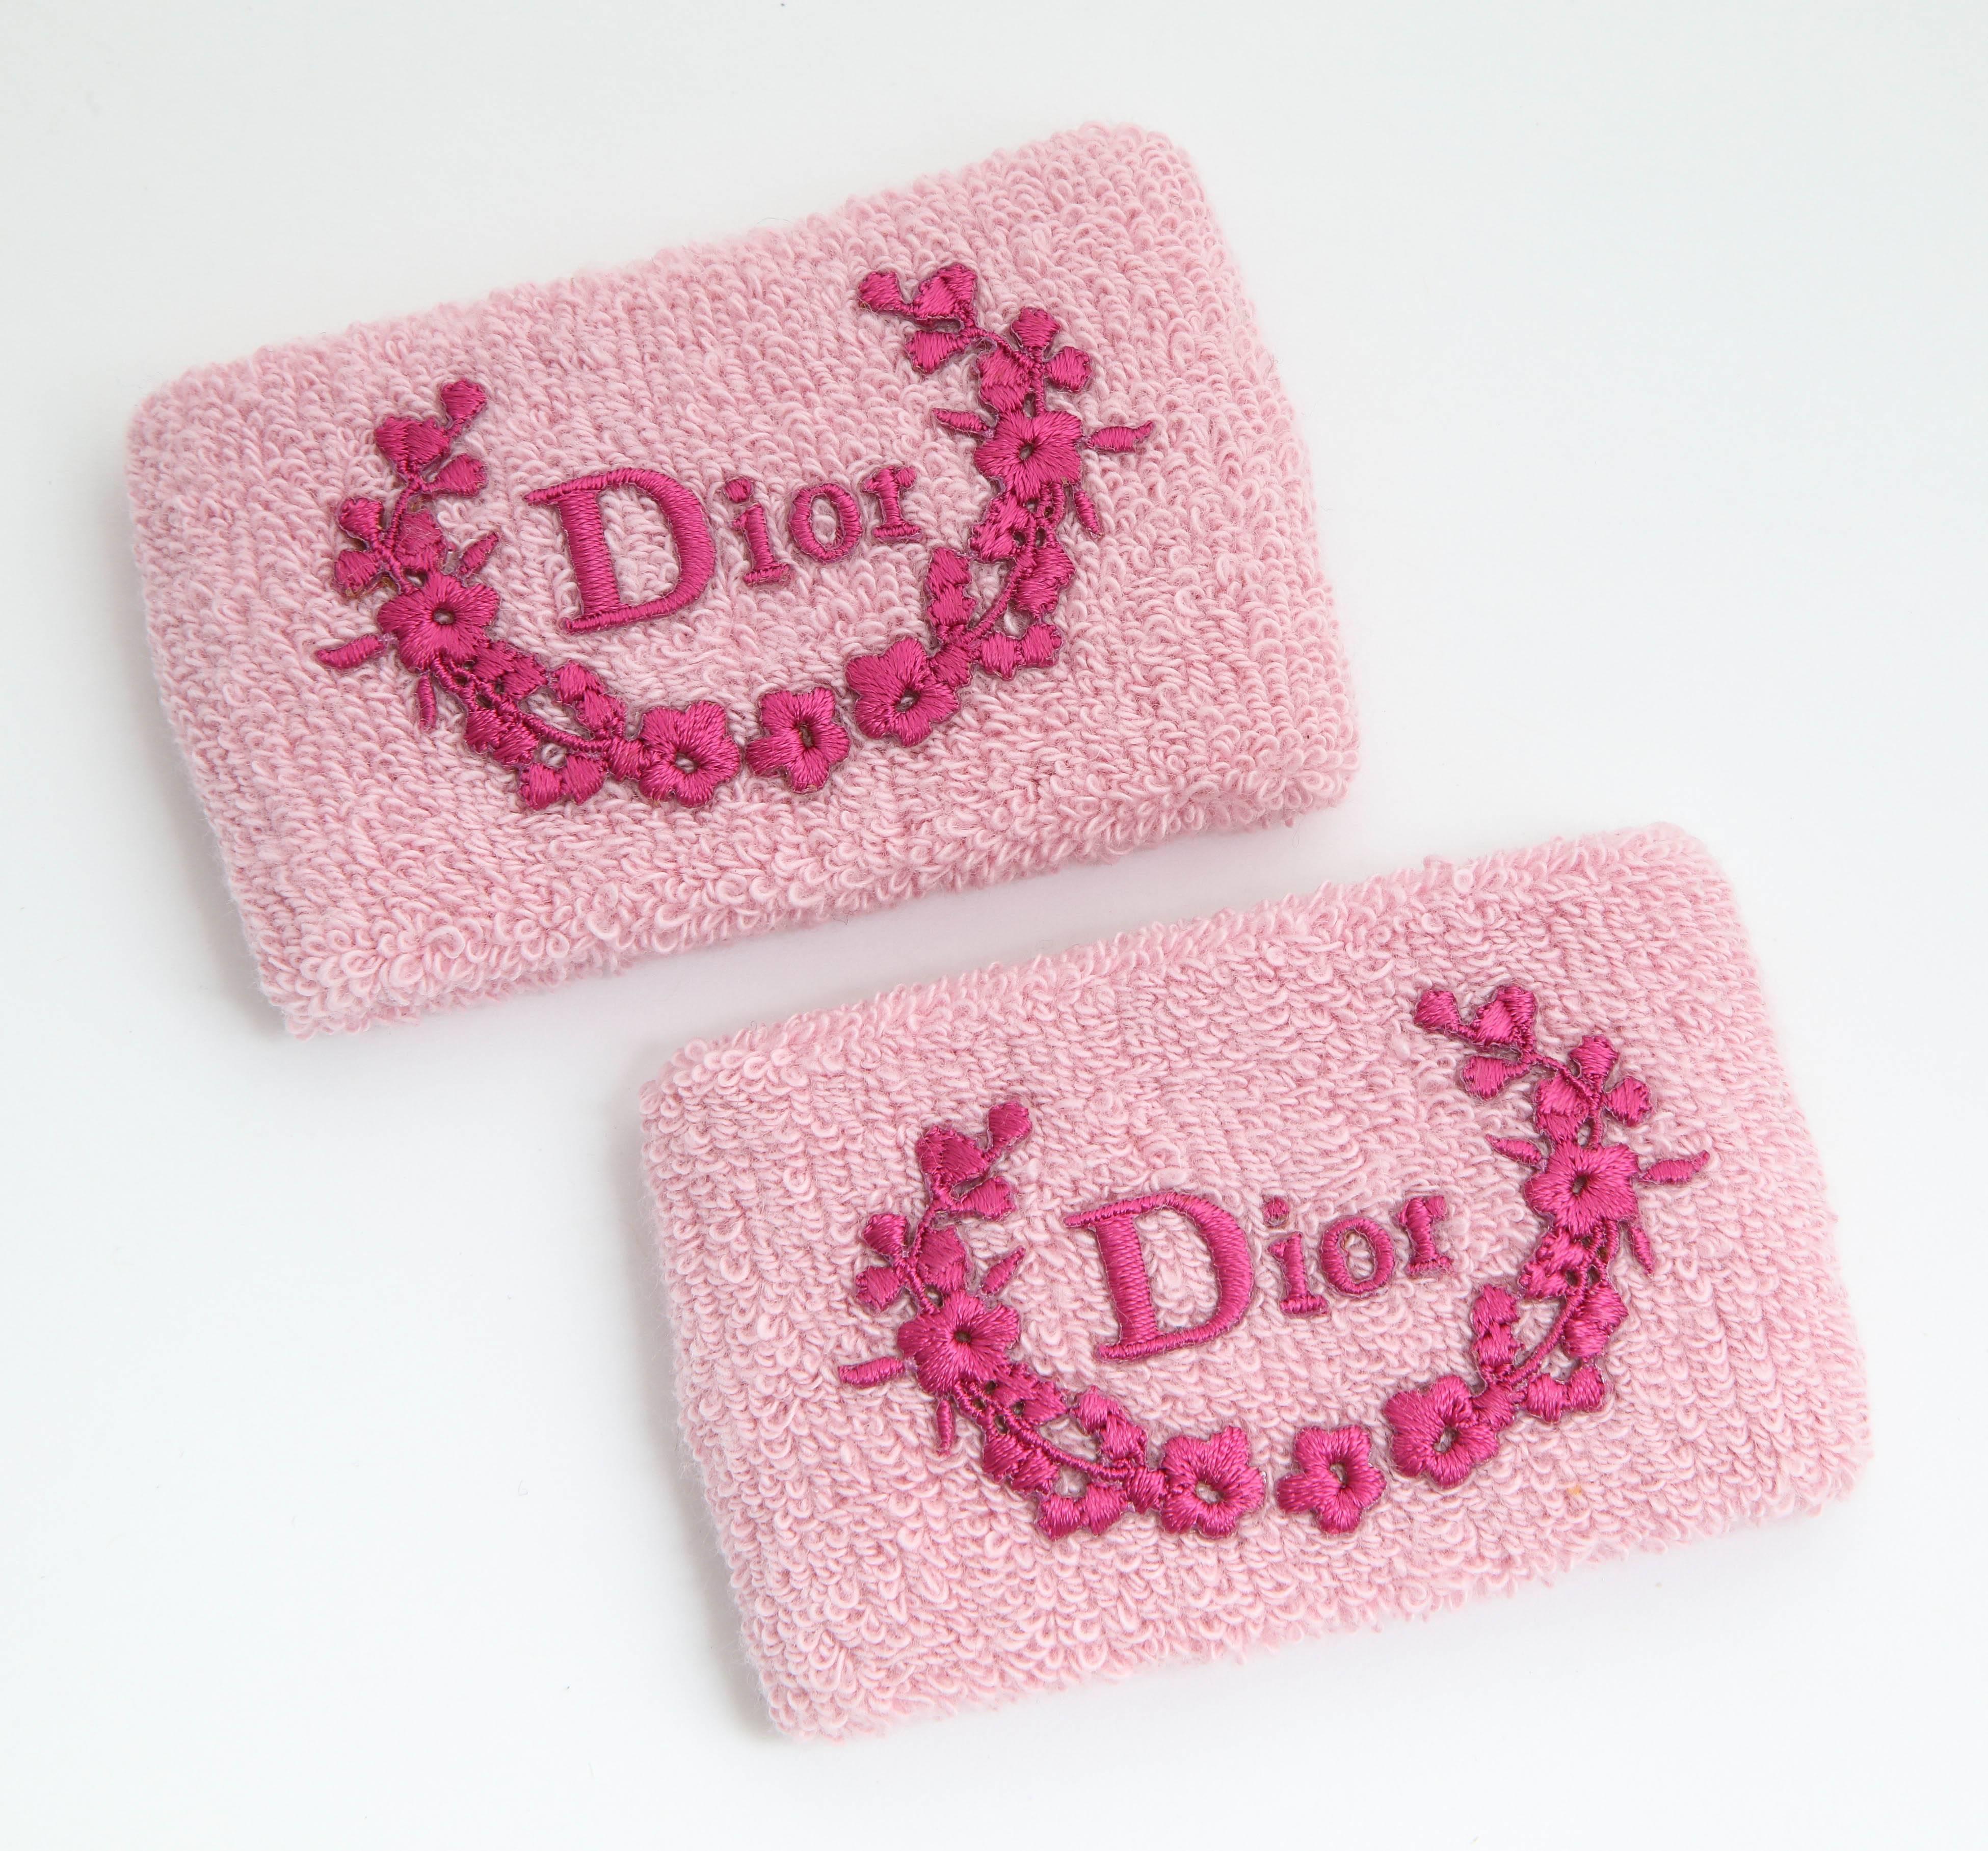 Christian Dior by John Galliano wrist band in pink. Set of 2
